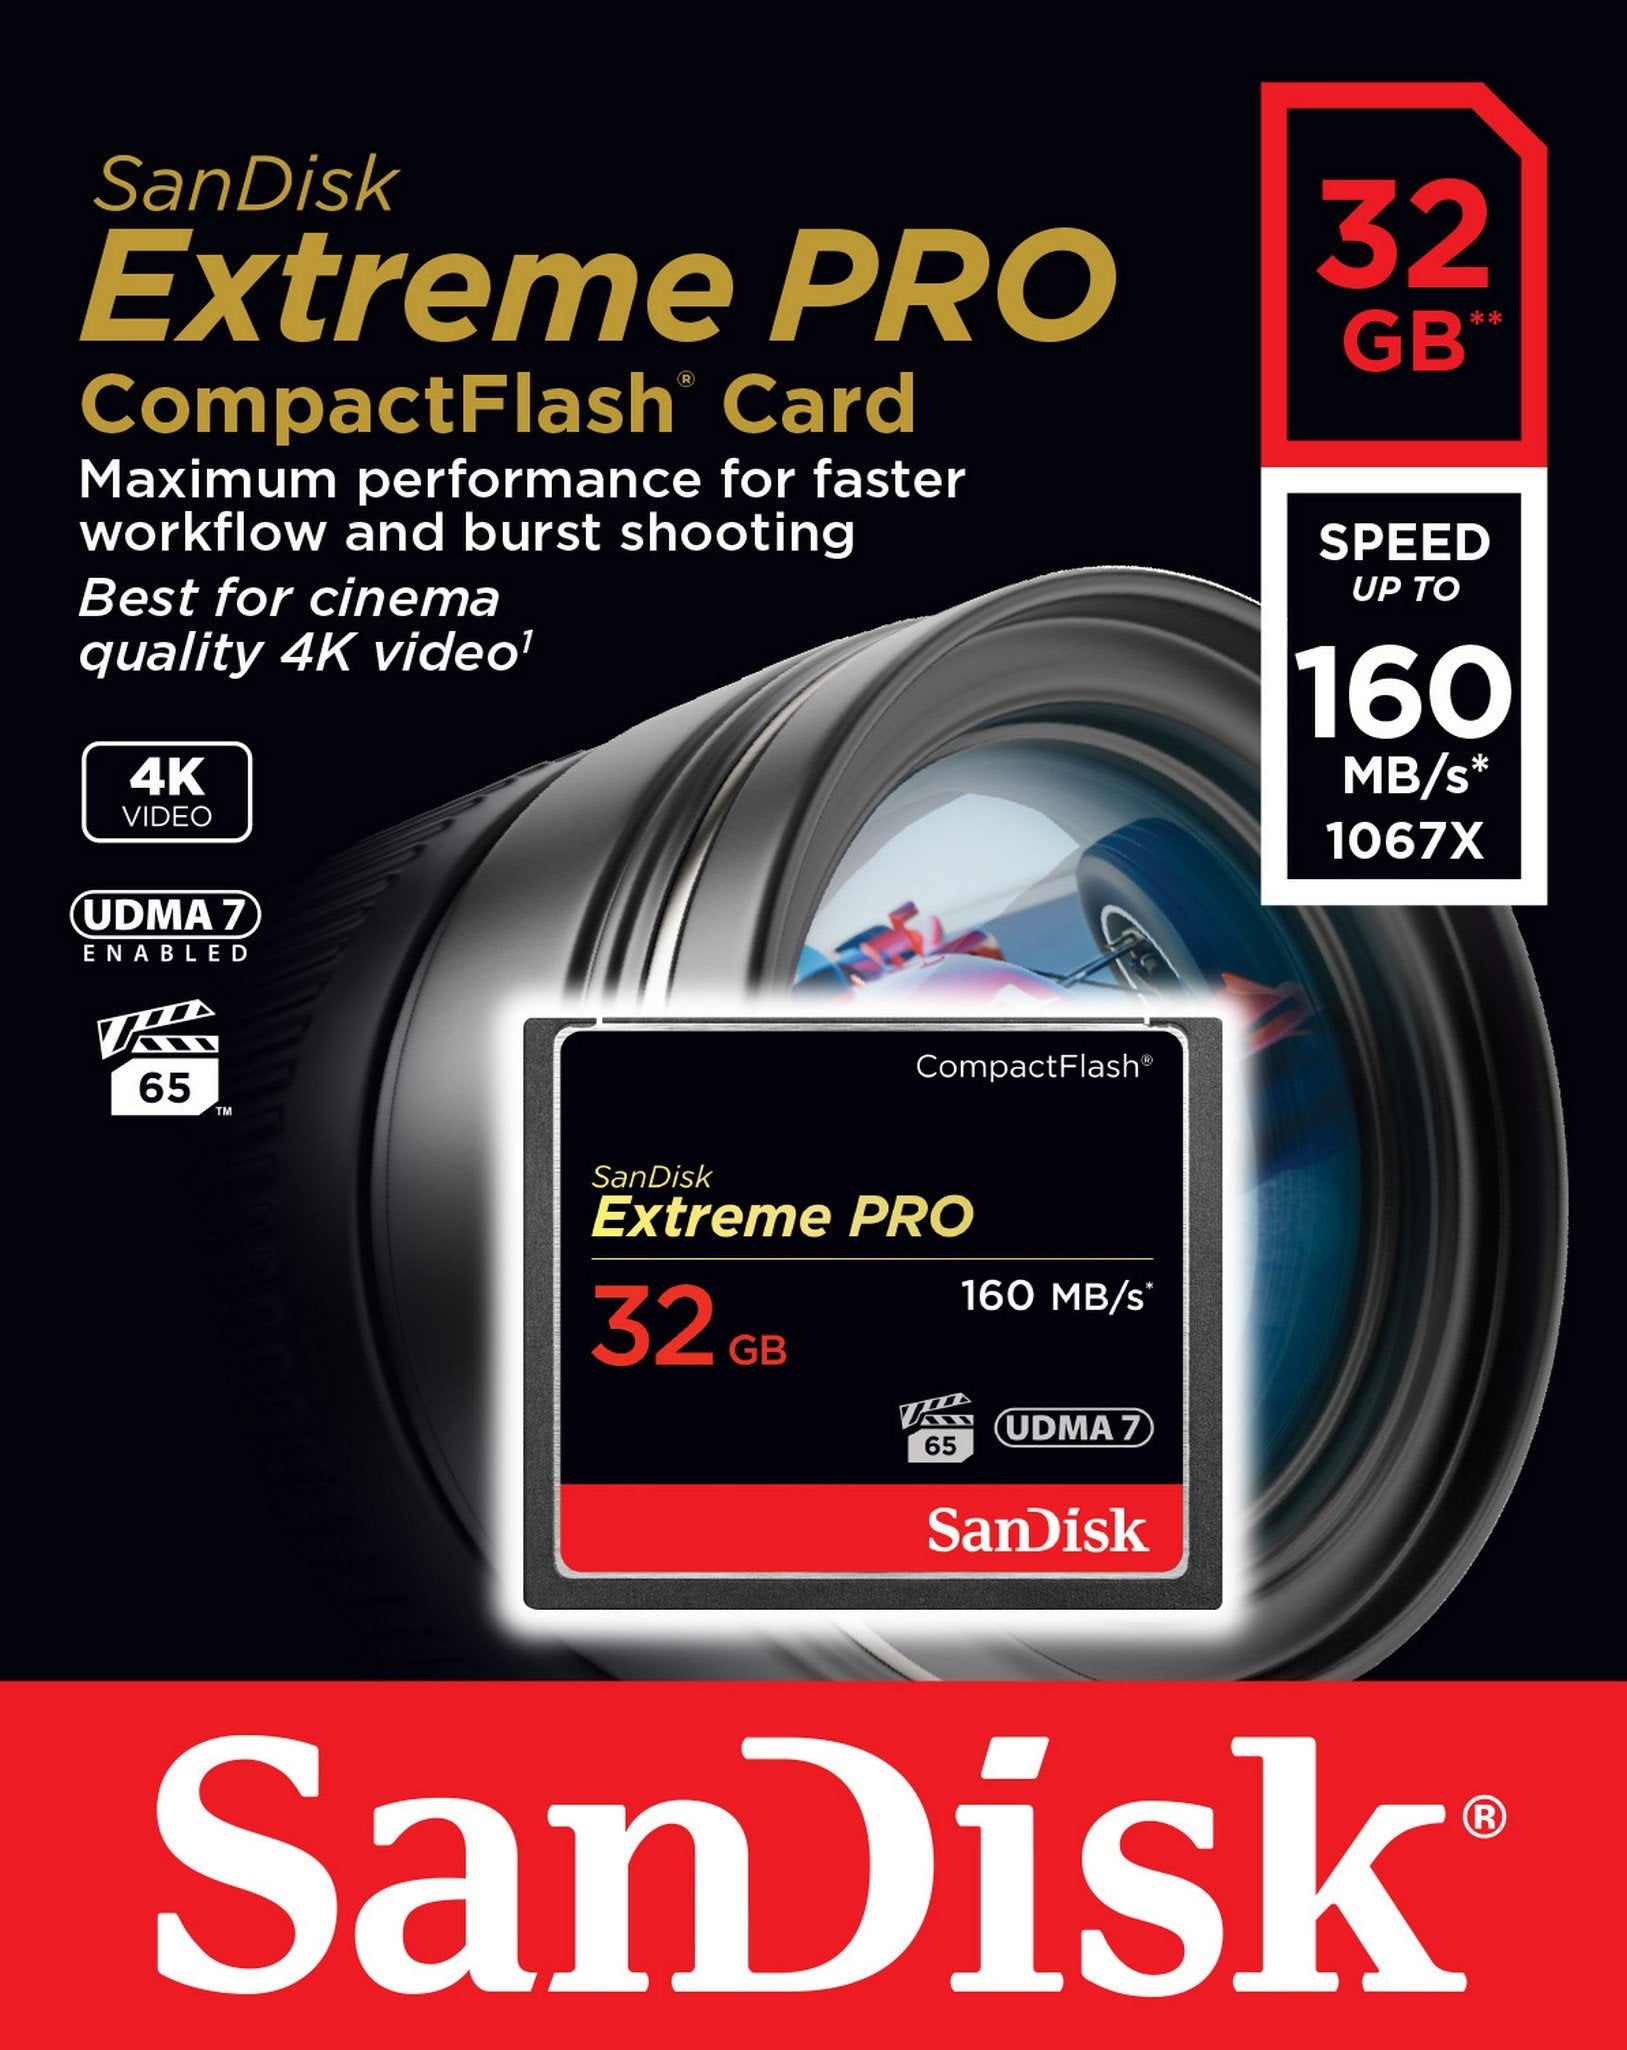 SanDisk Extreme PRO 32GB CompactFlash Memory Card UDMA 7 Speed Up To 160MB/s SDCFXPS-032G-X46 (OPEN BOX, LIKE NEW)